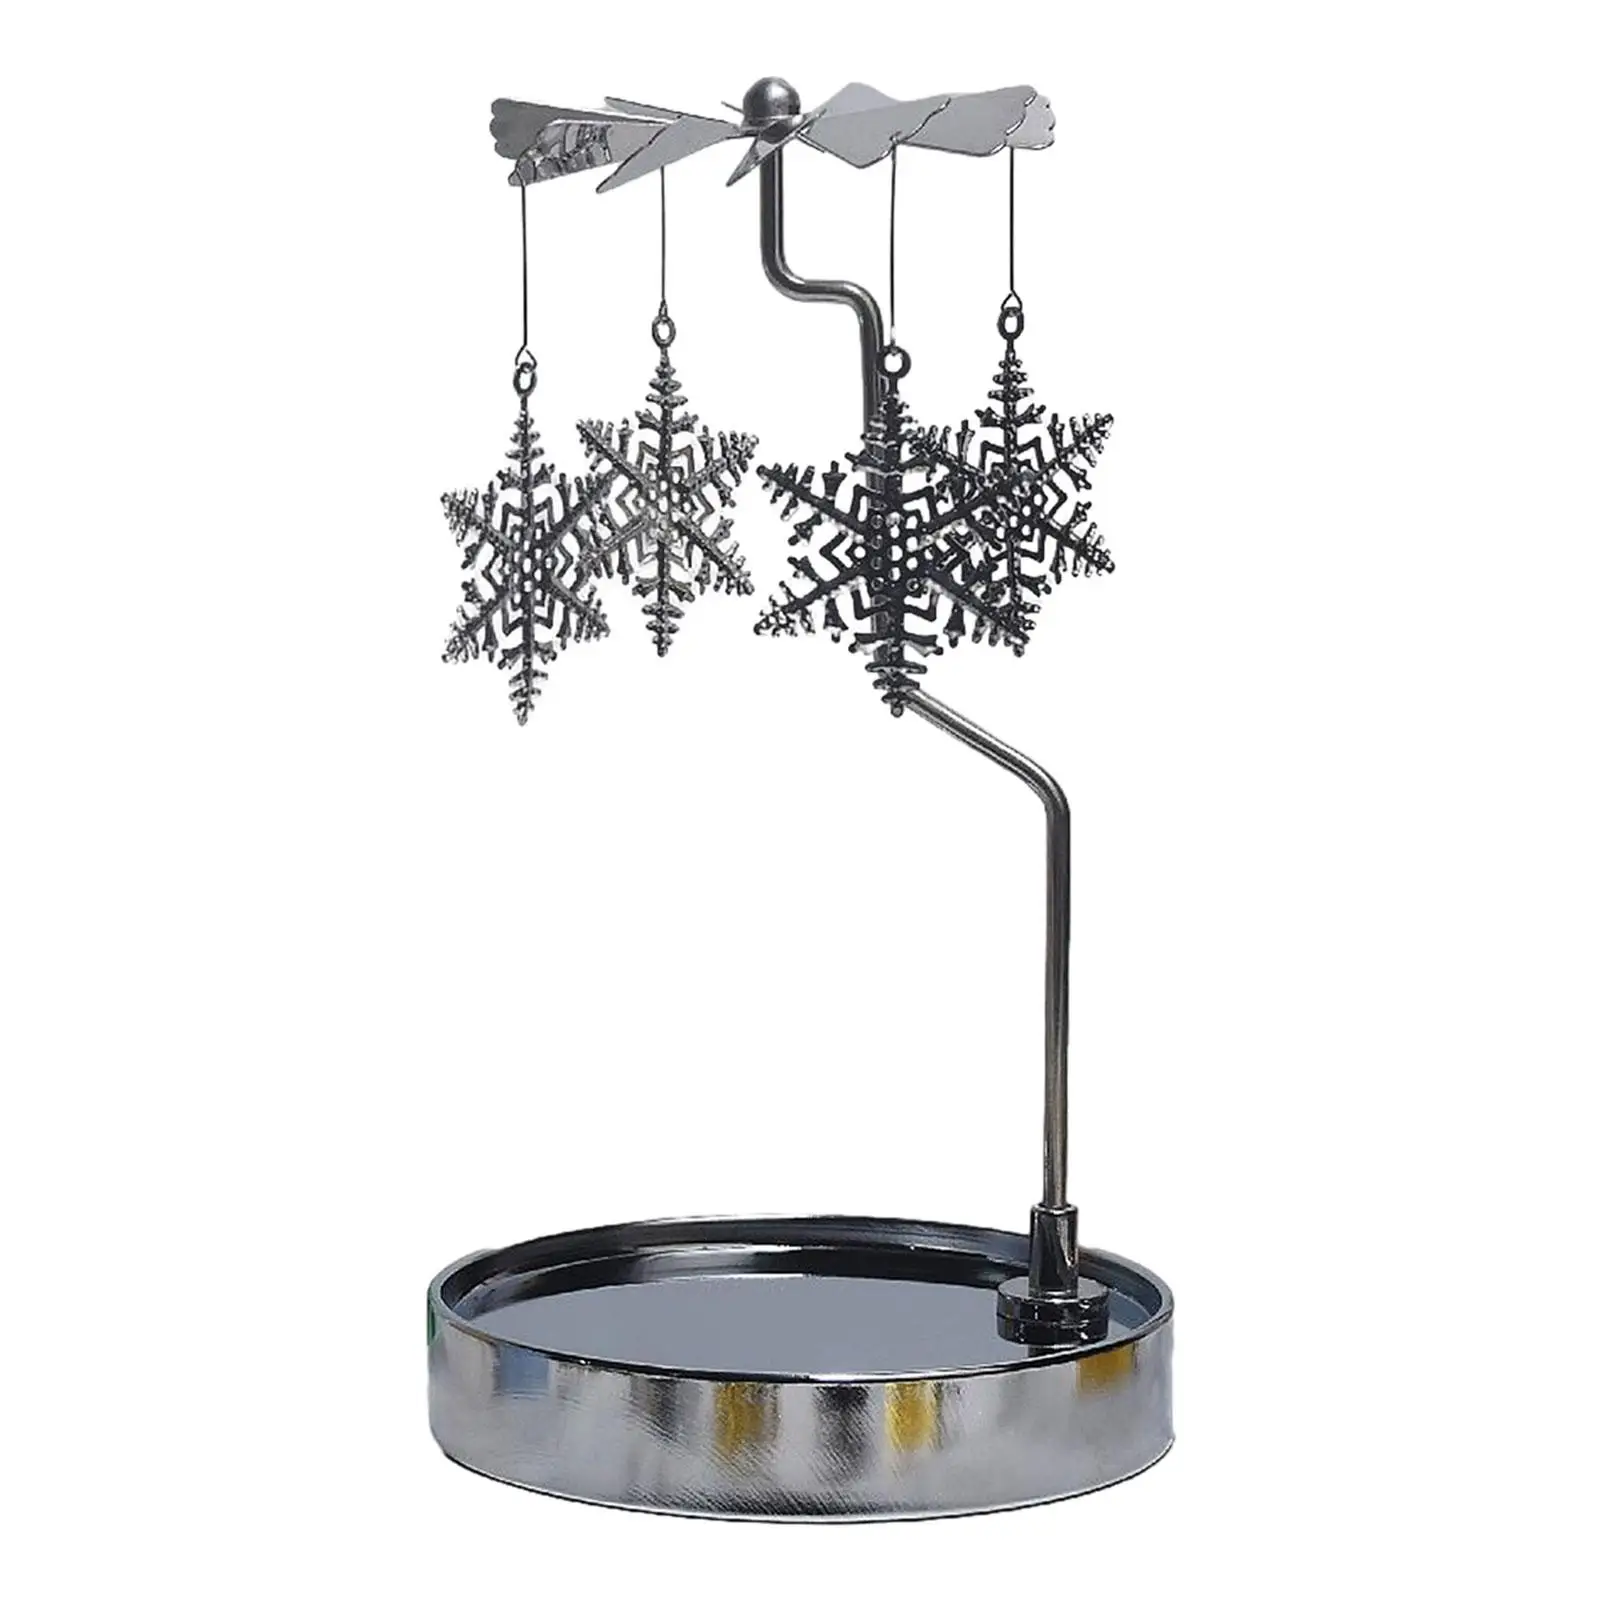 Rotating Candle Holder with Tray Romantic Rotating Candlestick Holder for Festivals Dining Room Dinner Table Living Room